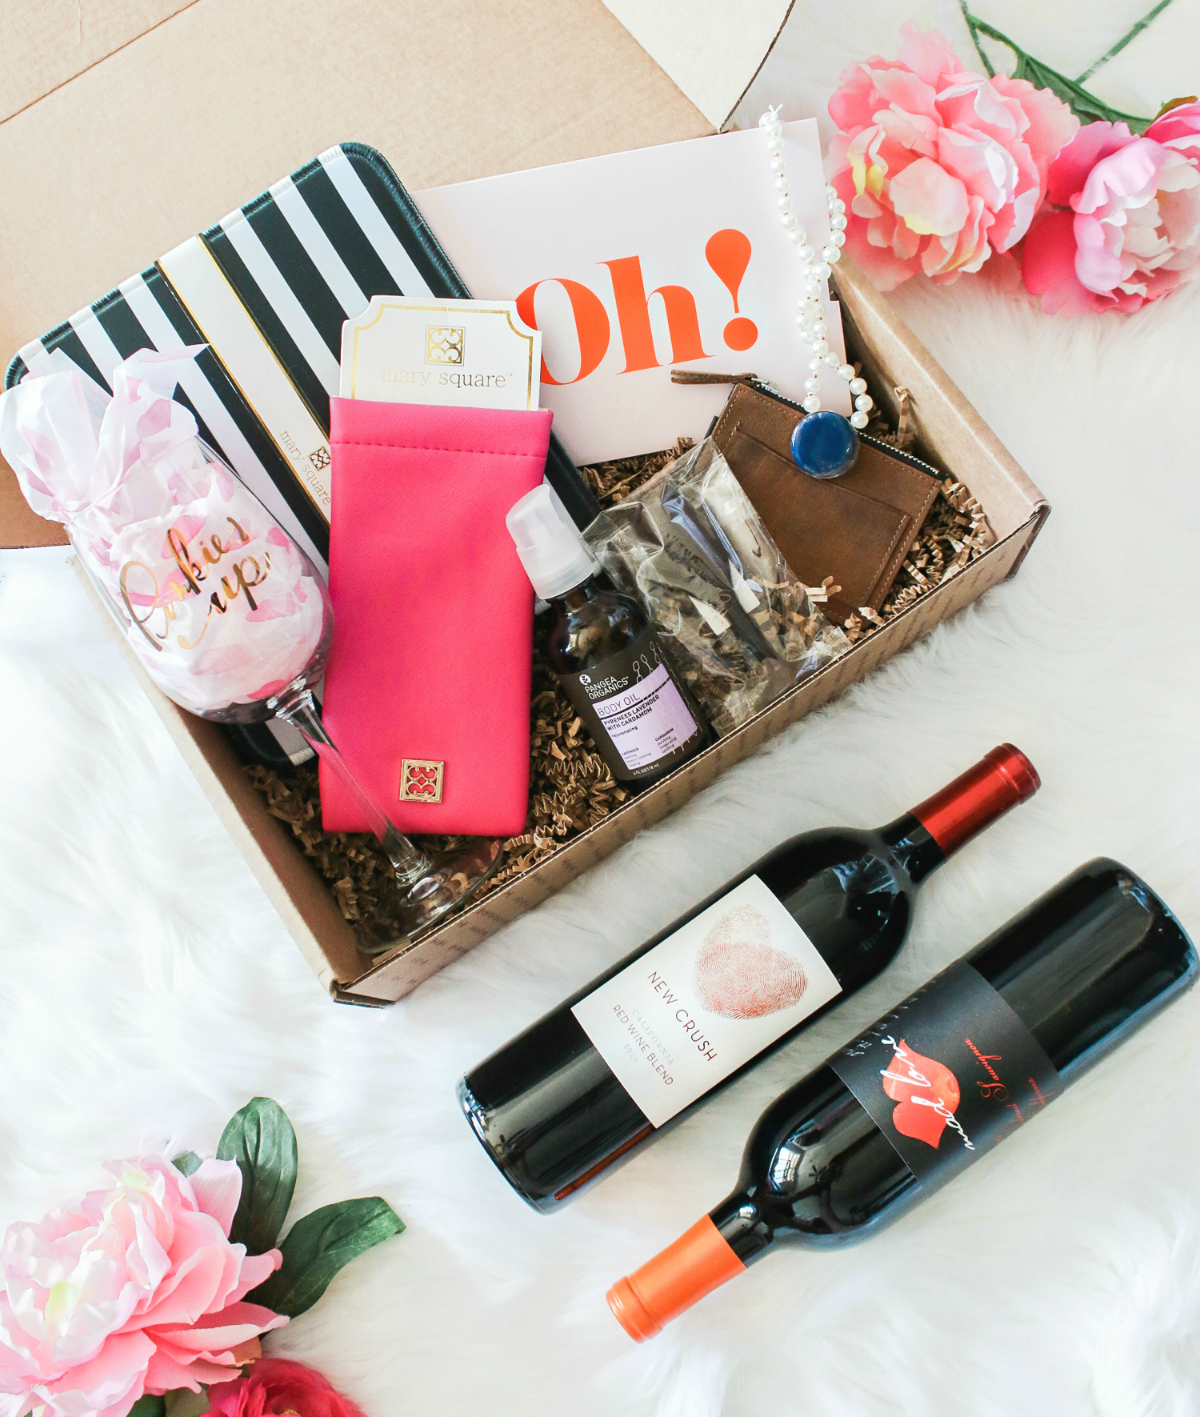 Vine Oh Treat Me Box review, Treat Me: Vine Oh! Subscription Box Review by southern lifestyle blogger Stephanie Ziajka from Diary of a Debutante, Vine Oh box, wine tasting subscription box, best wine subscription box